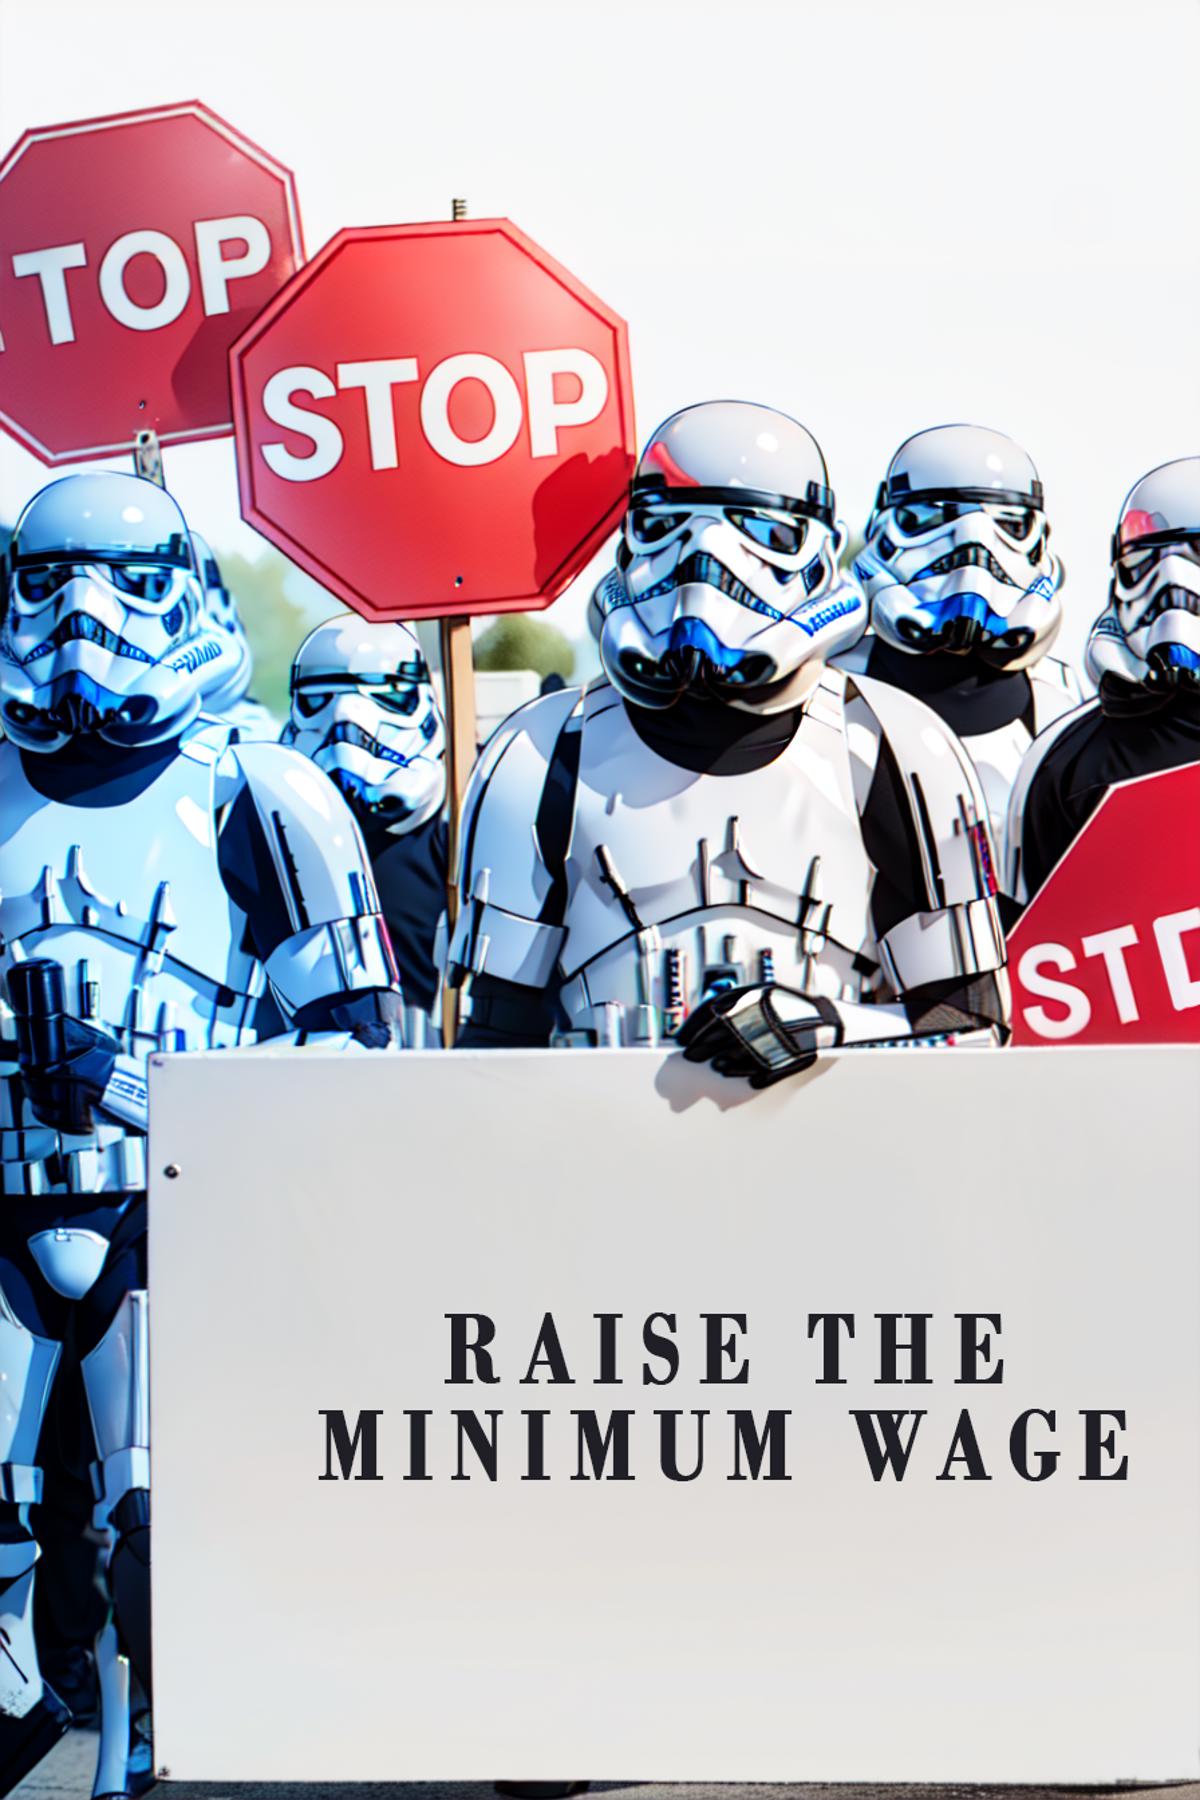 A group of Stormtrooper actors holding a sign for raising the minimum wage.